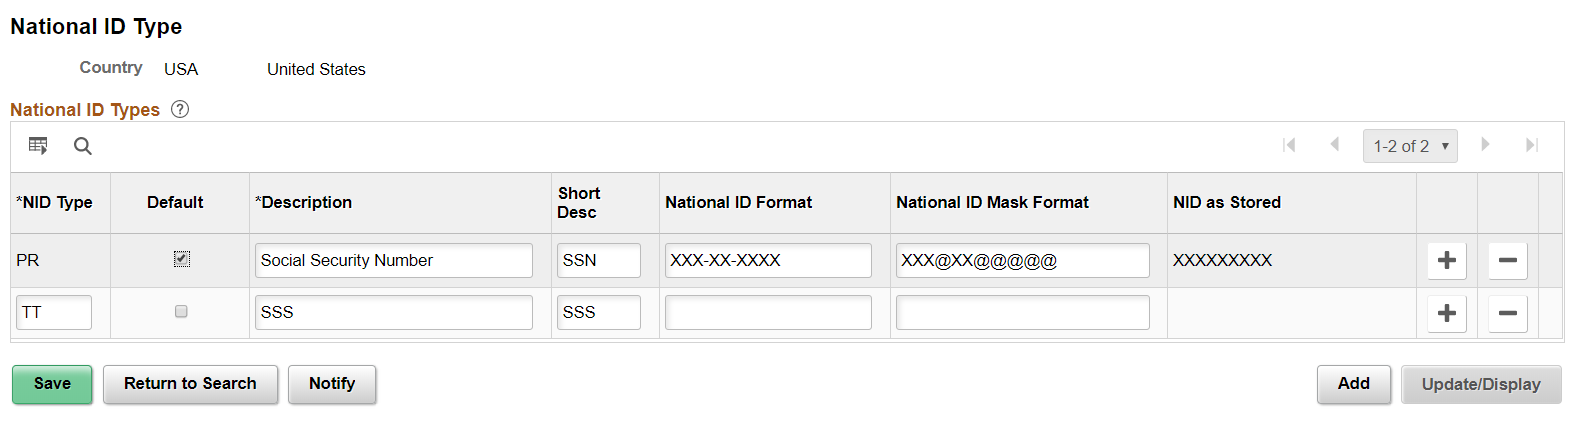 National ID Type Page